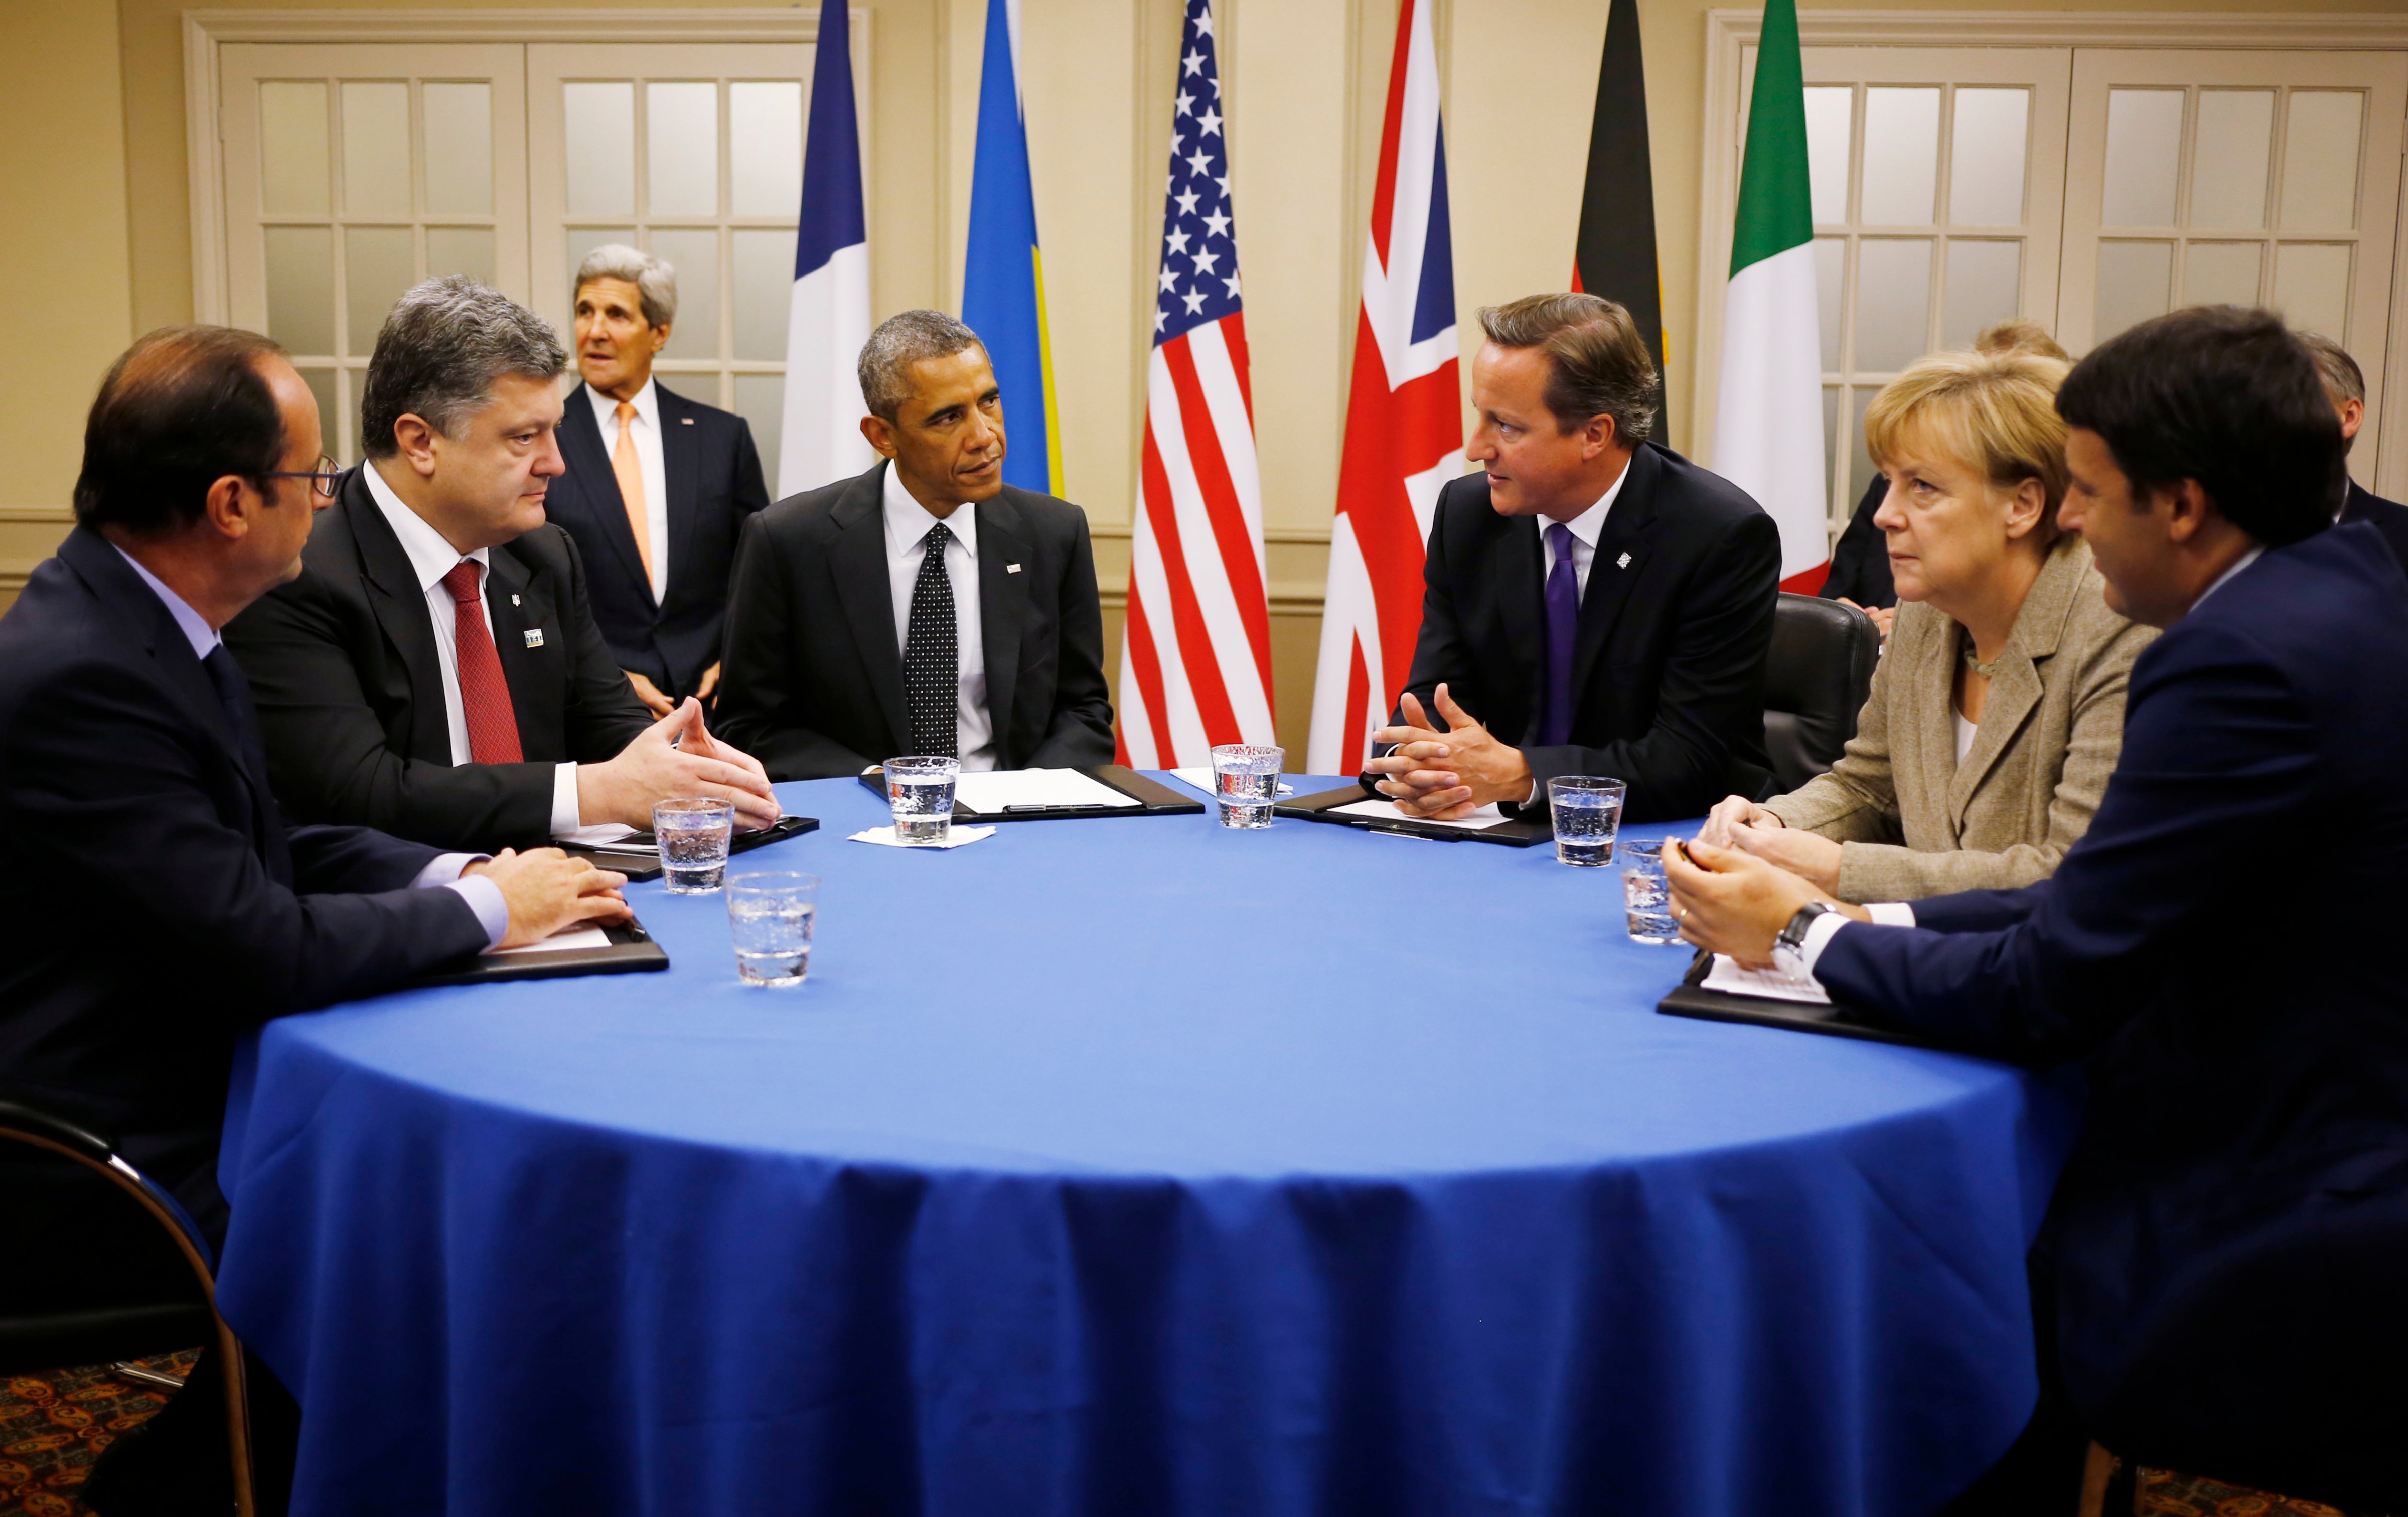 President Barack Obama is seated at a table with, from left to right: France's President Francois Hollande; Ukraine President Petro Poroshenko; British Prime Minister David Cameron; German Chancellor Angela Merkel; and Italian Prime Minister Matteo Renzi as they meet about Ukraine at the NATO summit at Celtic Manor in Newport, Wales on Sept. 4, 2014. (Charles Dharapak—AP)